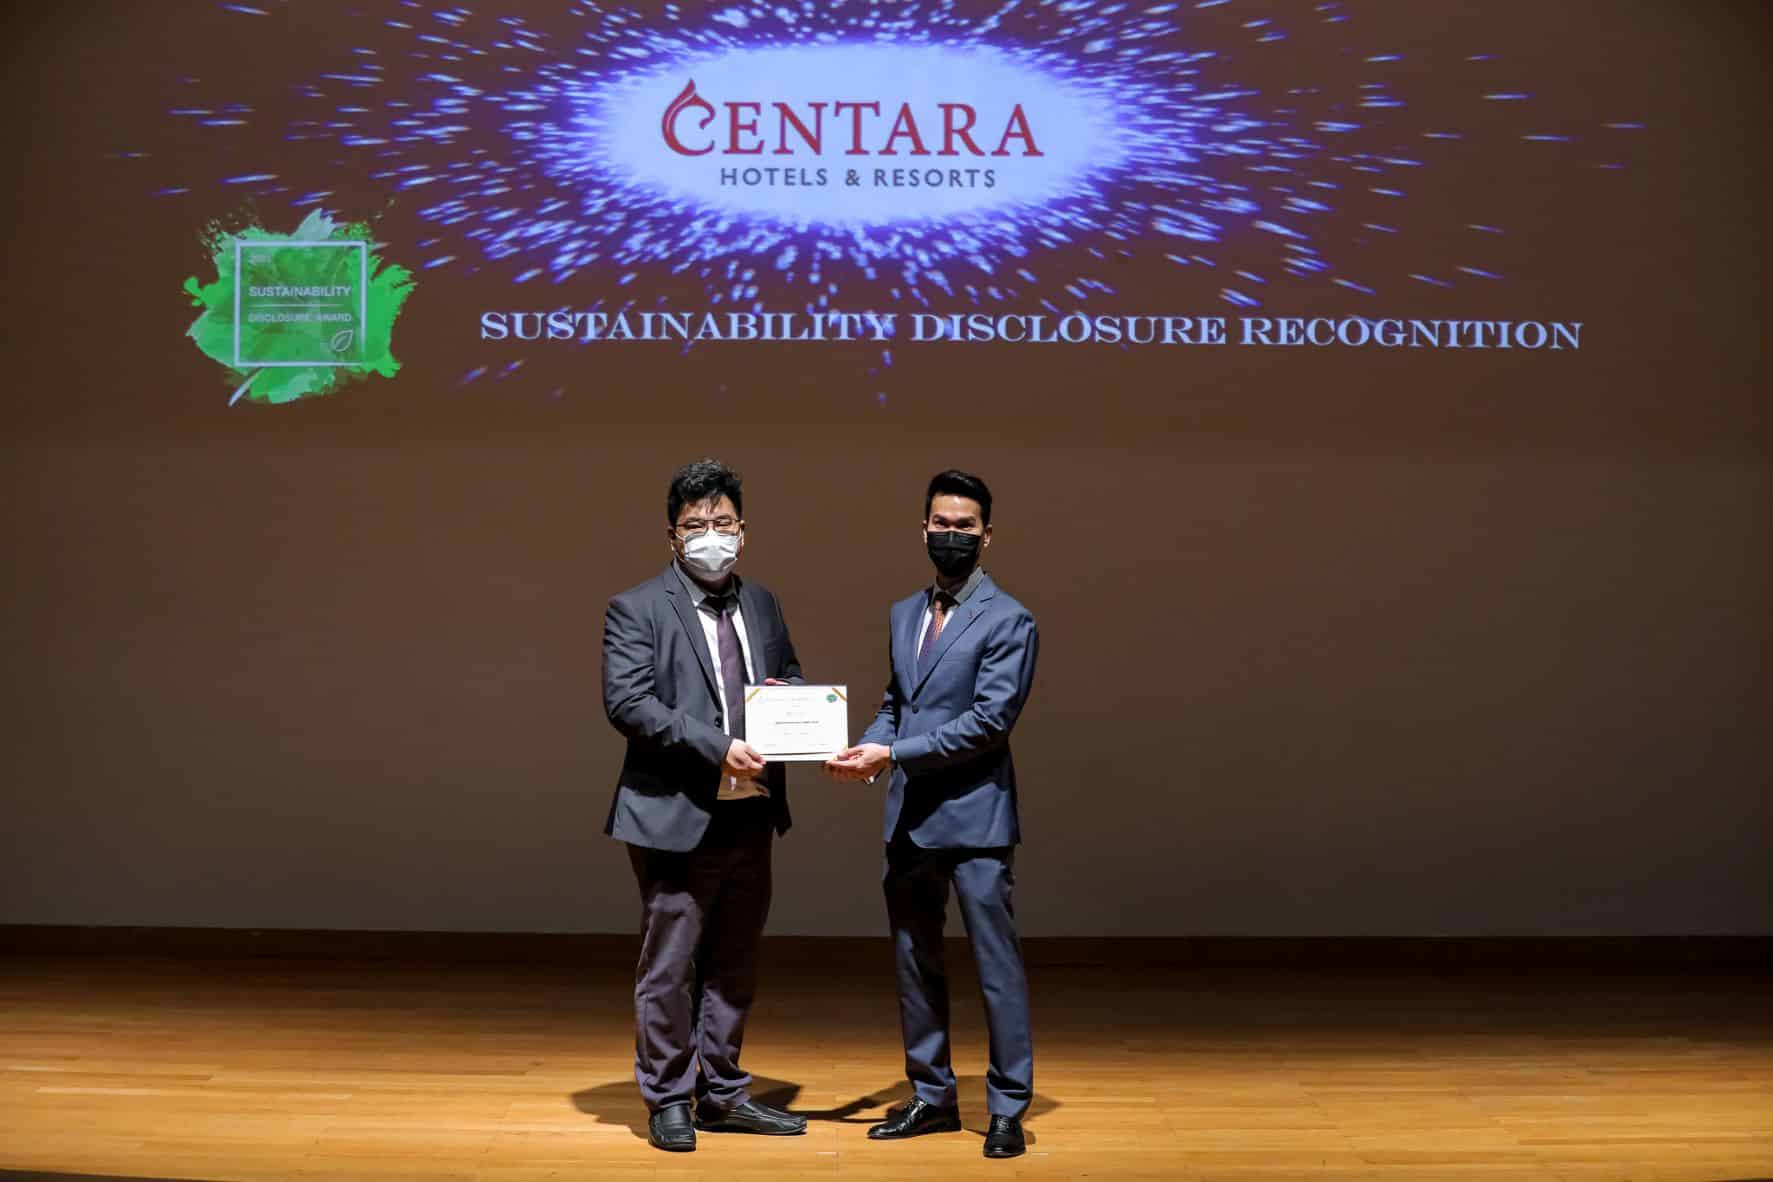 Phto-Centara-Received-Sustainability-Disclosure-Recognition-2021_1.jpg